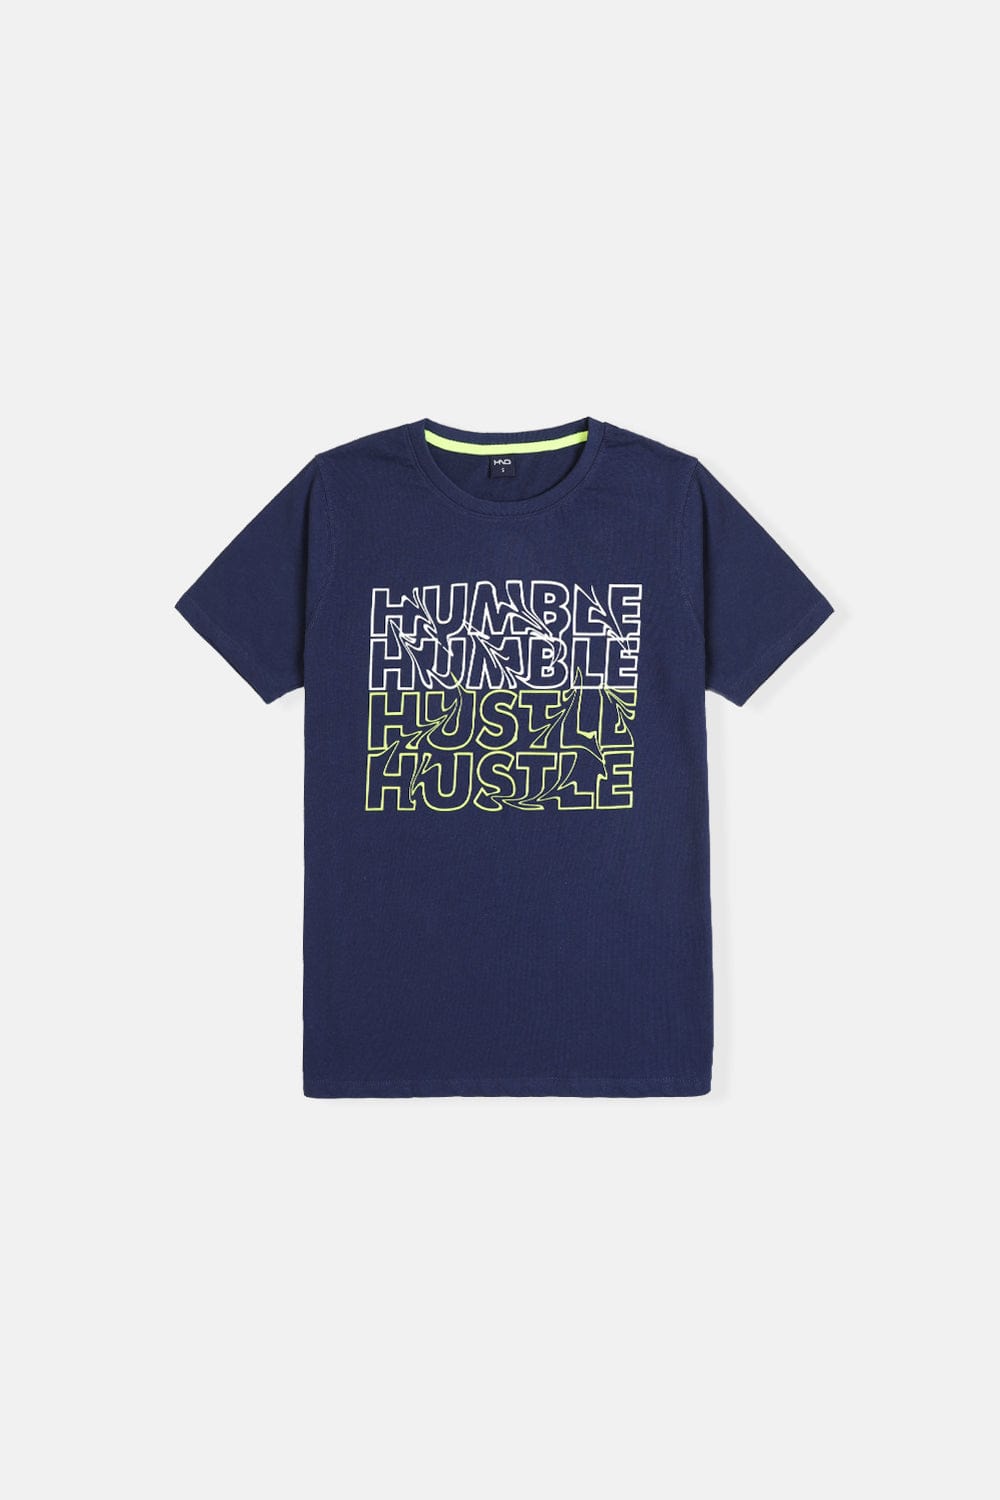 Hope Not Out by Shahid Afridi Men T-Shirt Man Navy Humble Hustle T-Sht